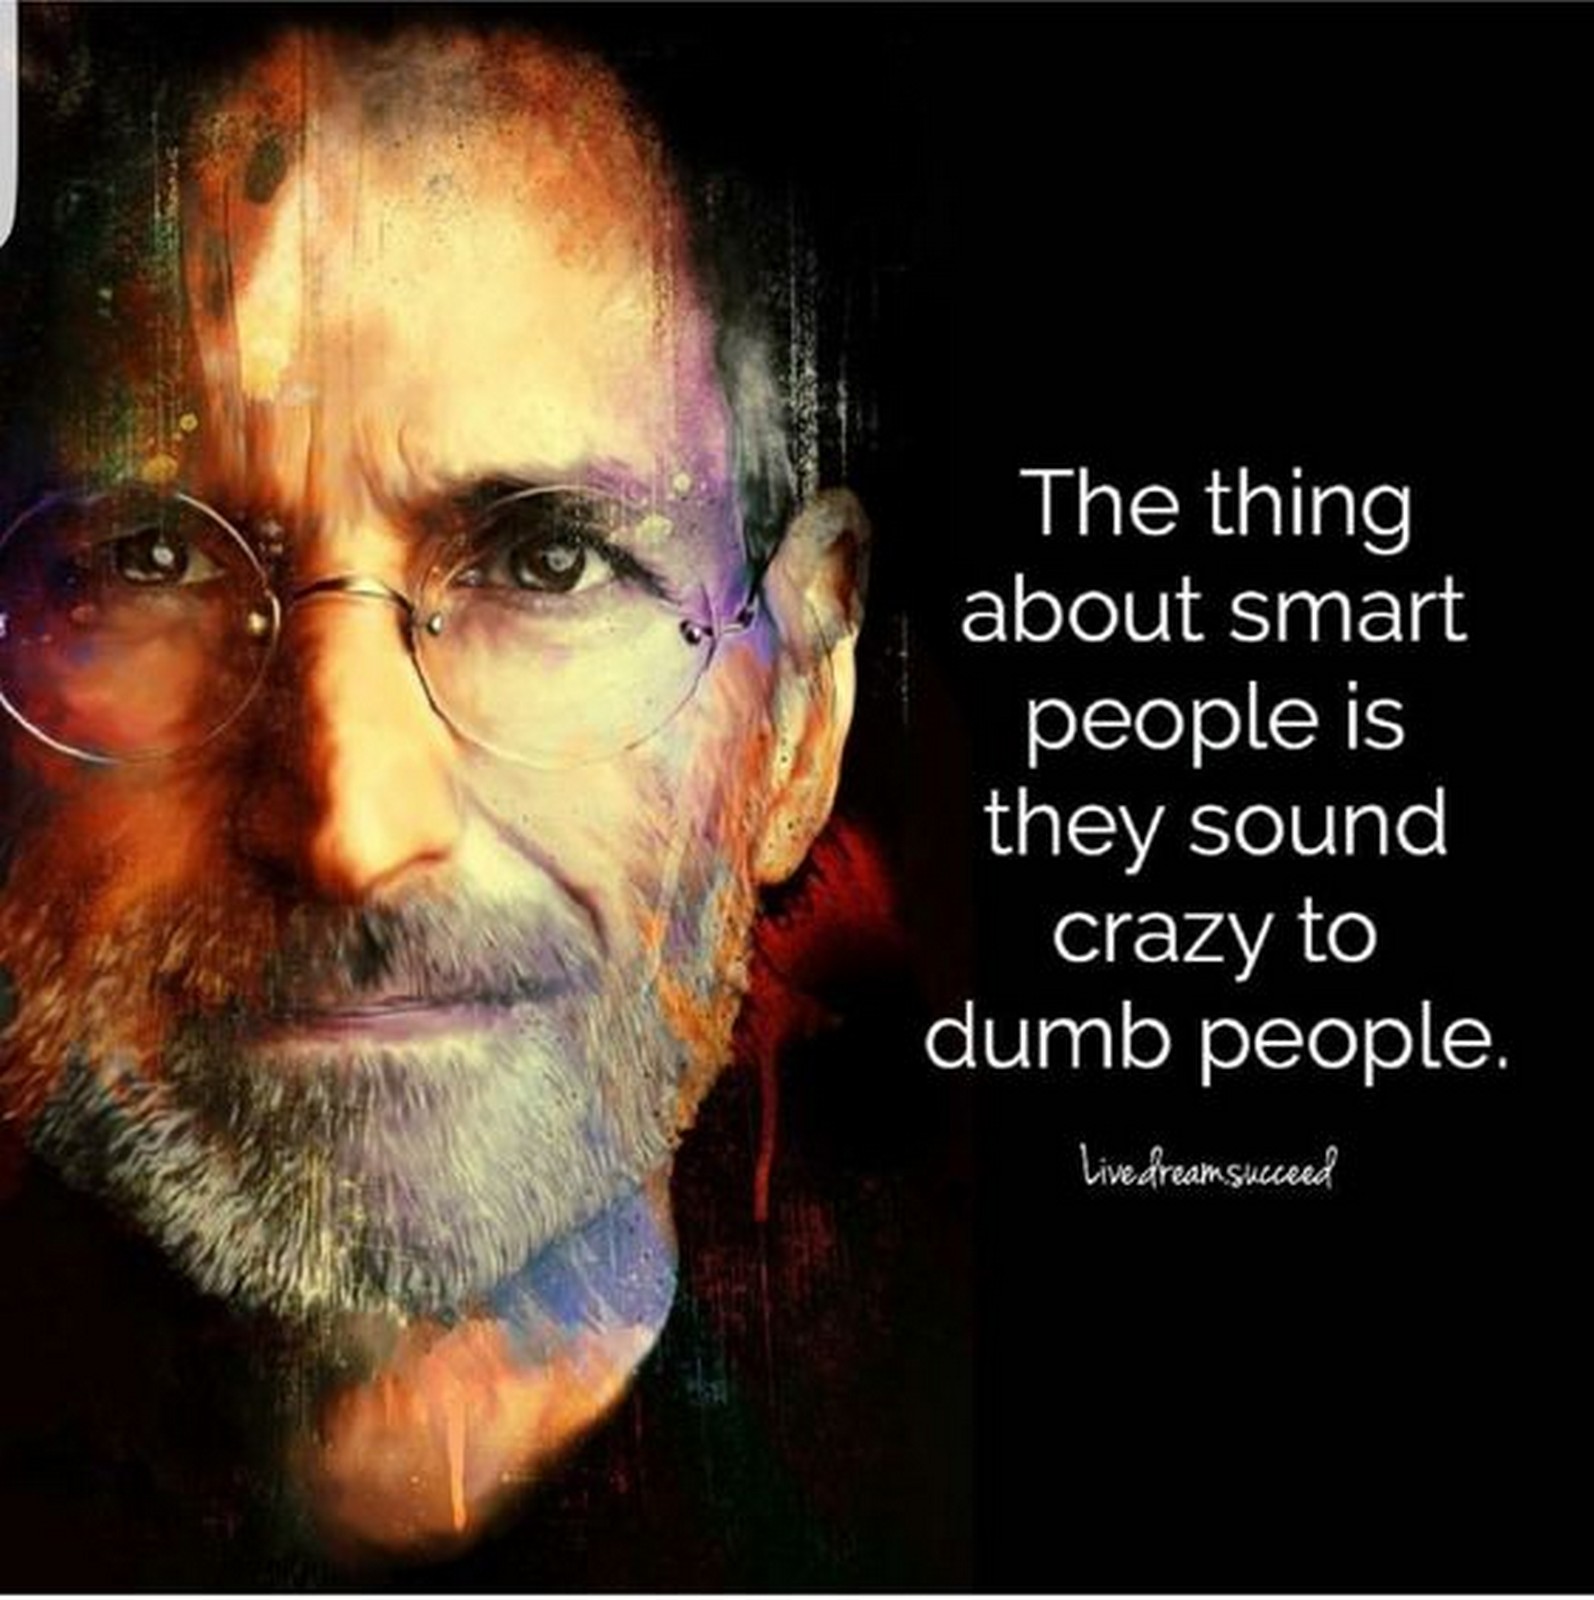 19 Best Steve Jobs Quotes - "The thing about smart people is they sound crazy to dumb people."